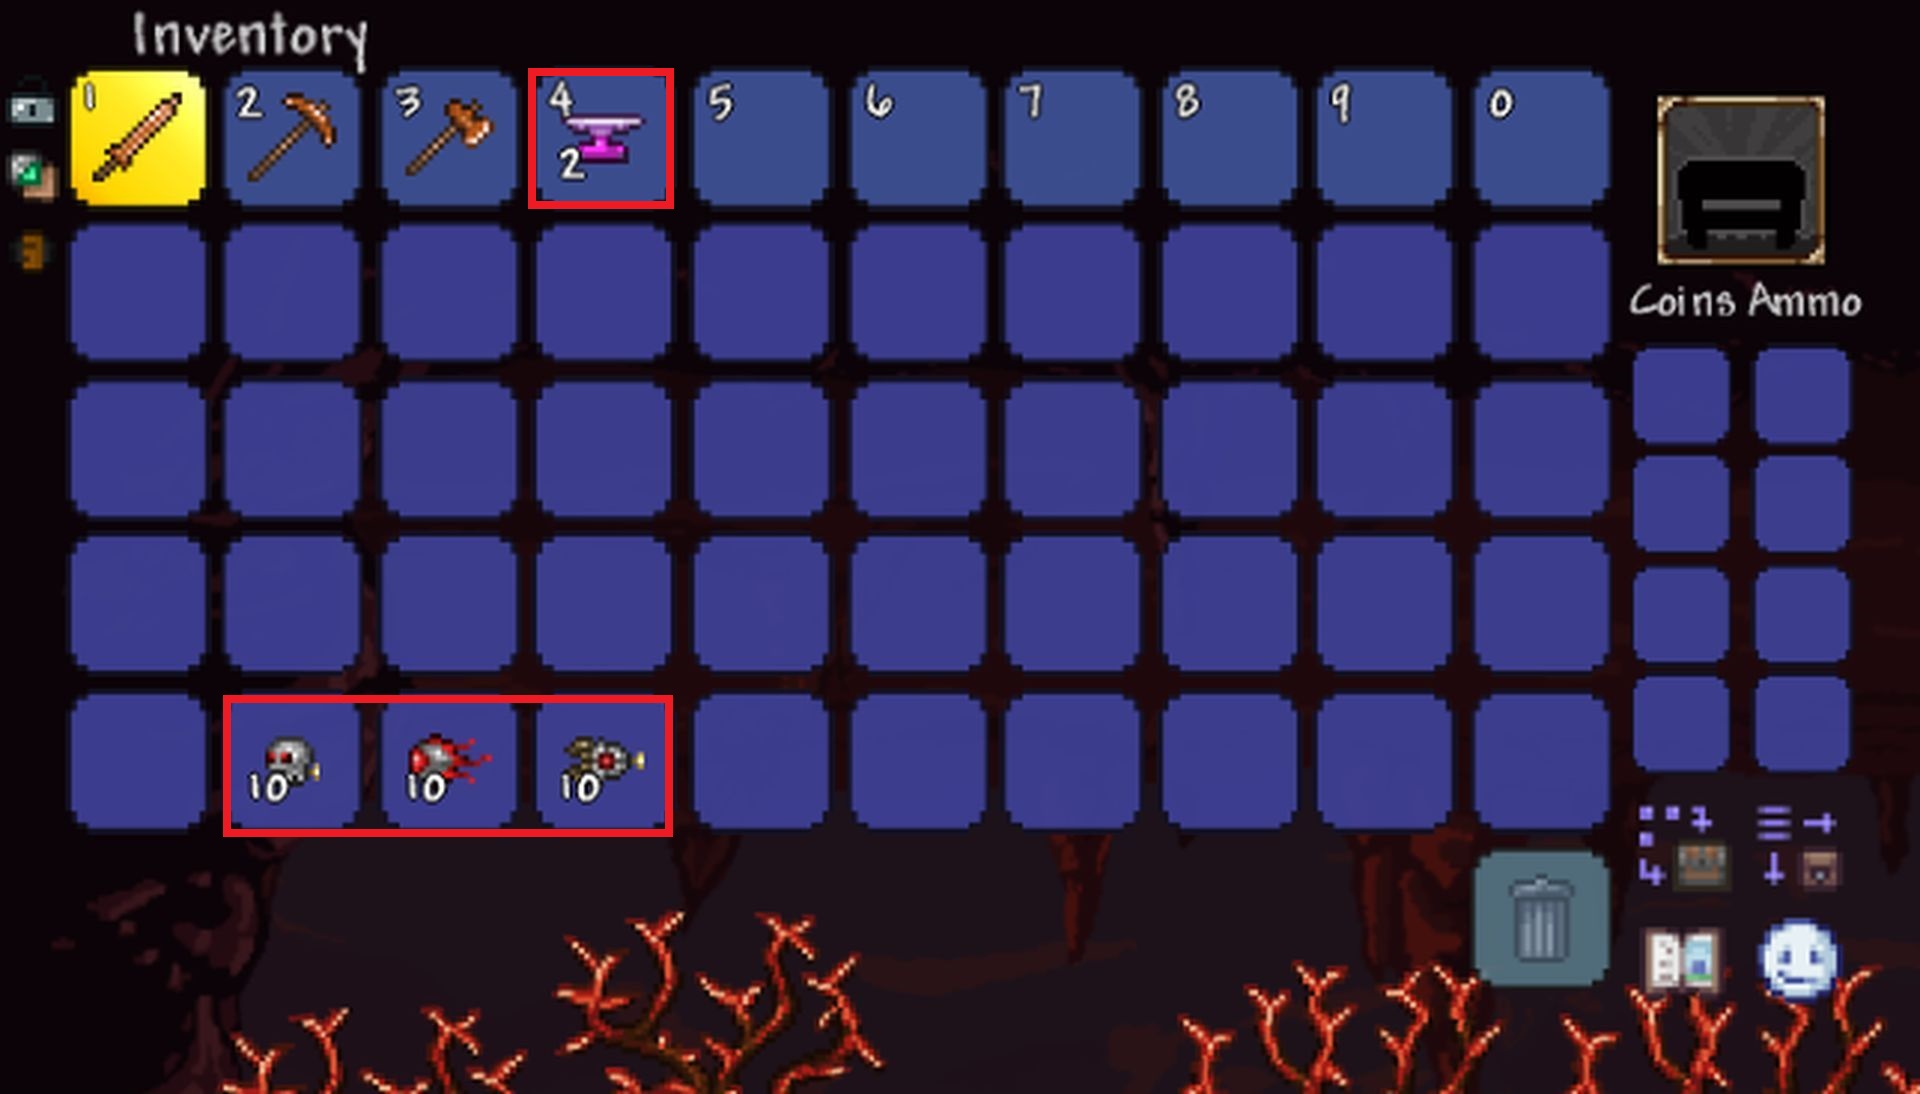 In this article, we are going to be covering how to summon Terraria Mechdusa using Ocram's Razor, so you can face and defeat this new boss added in 1.4.4.